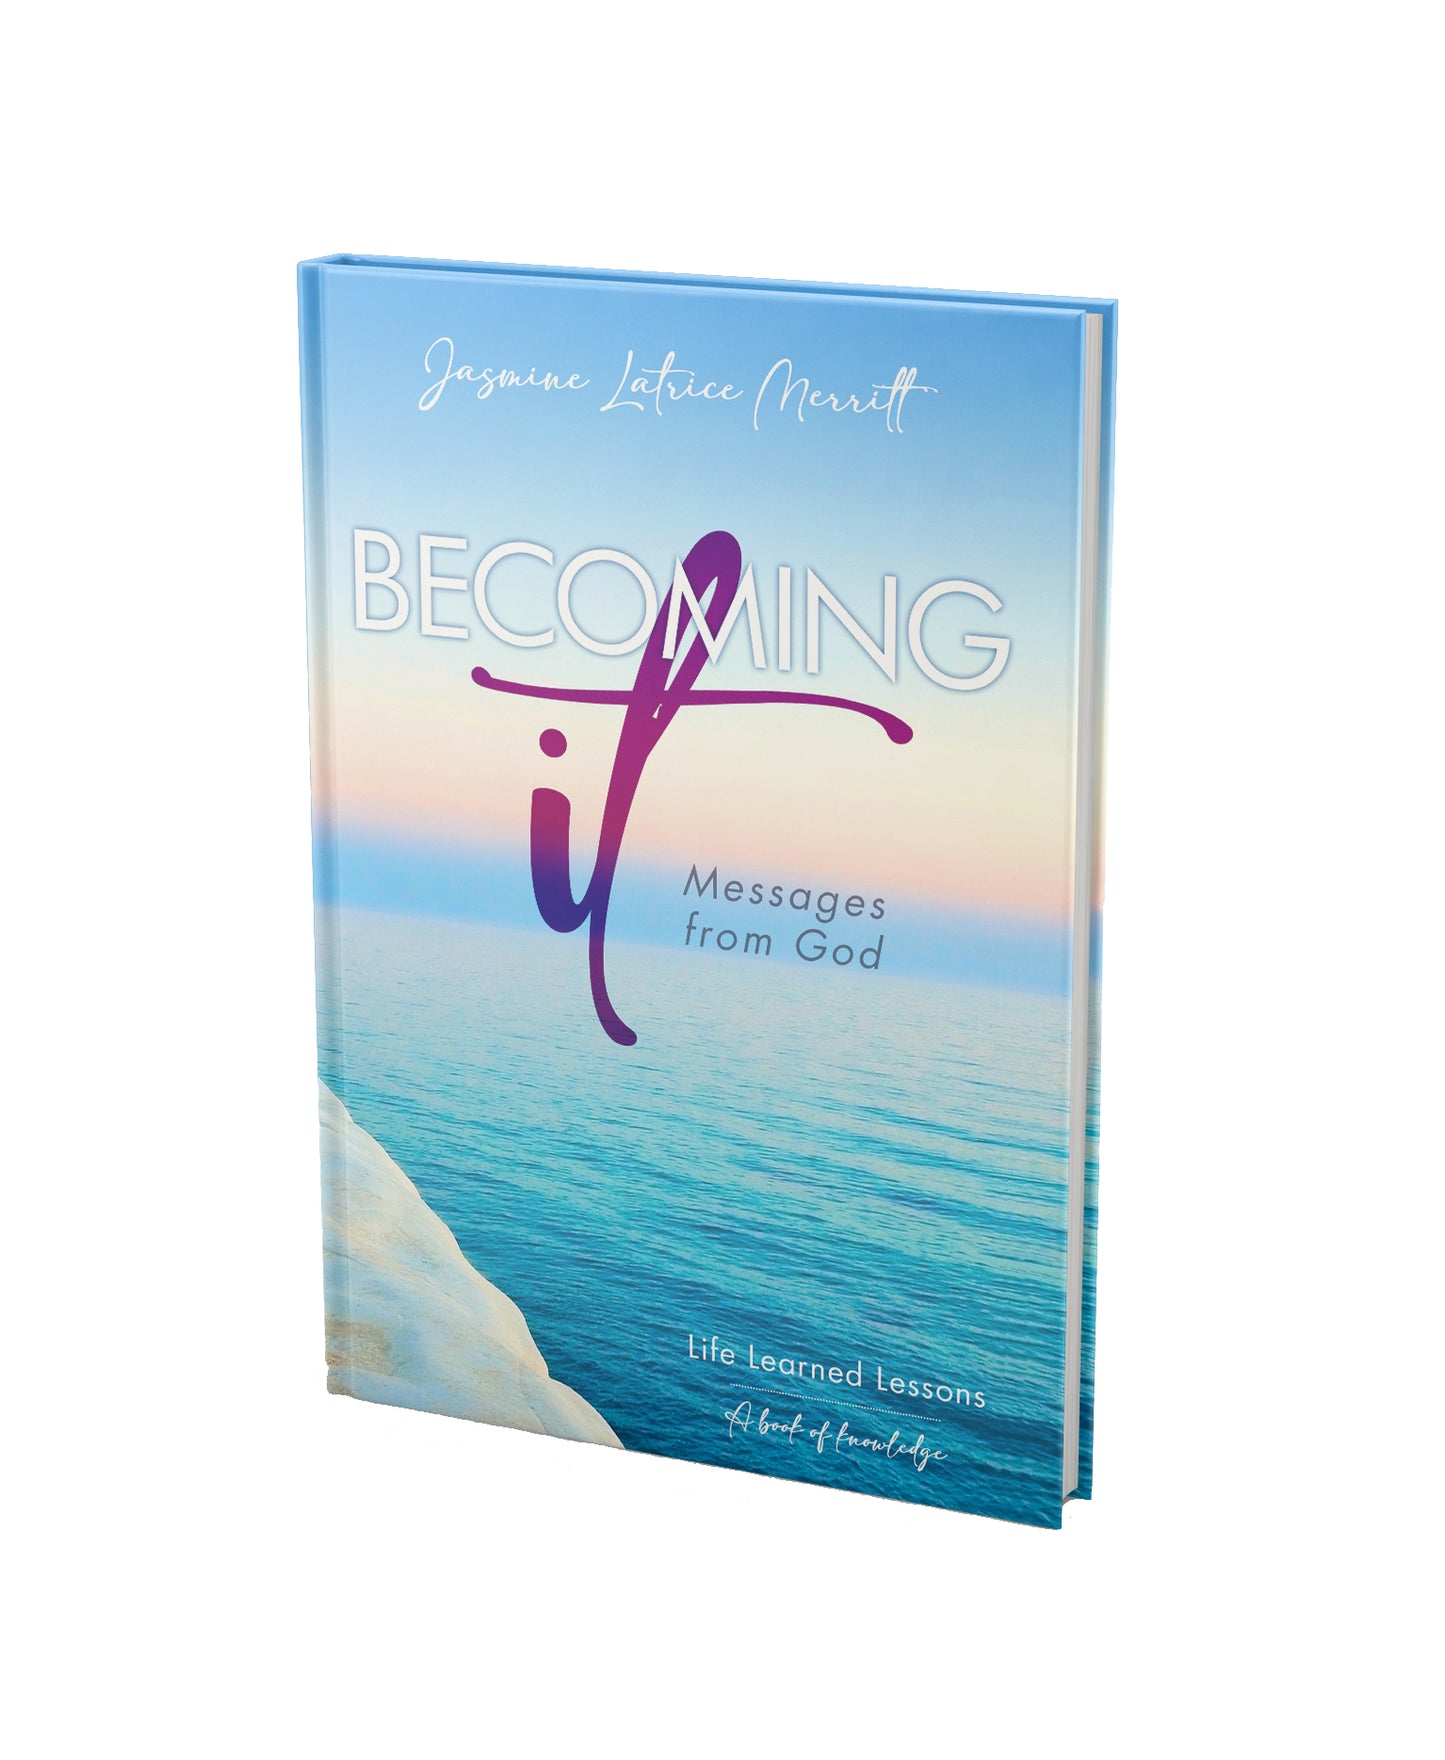 "Becoming It: Messages from God"